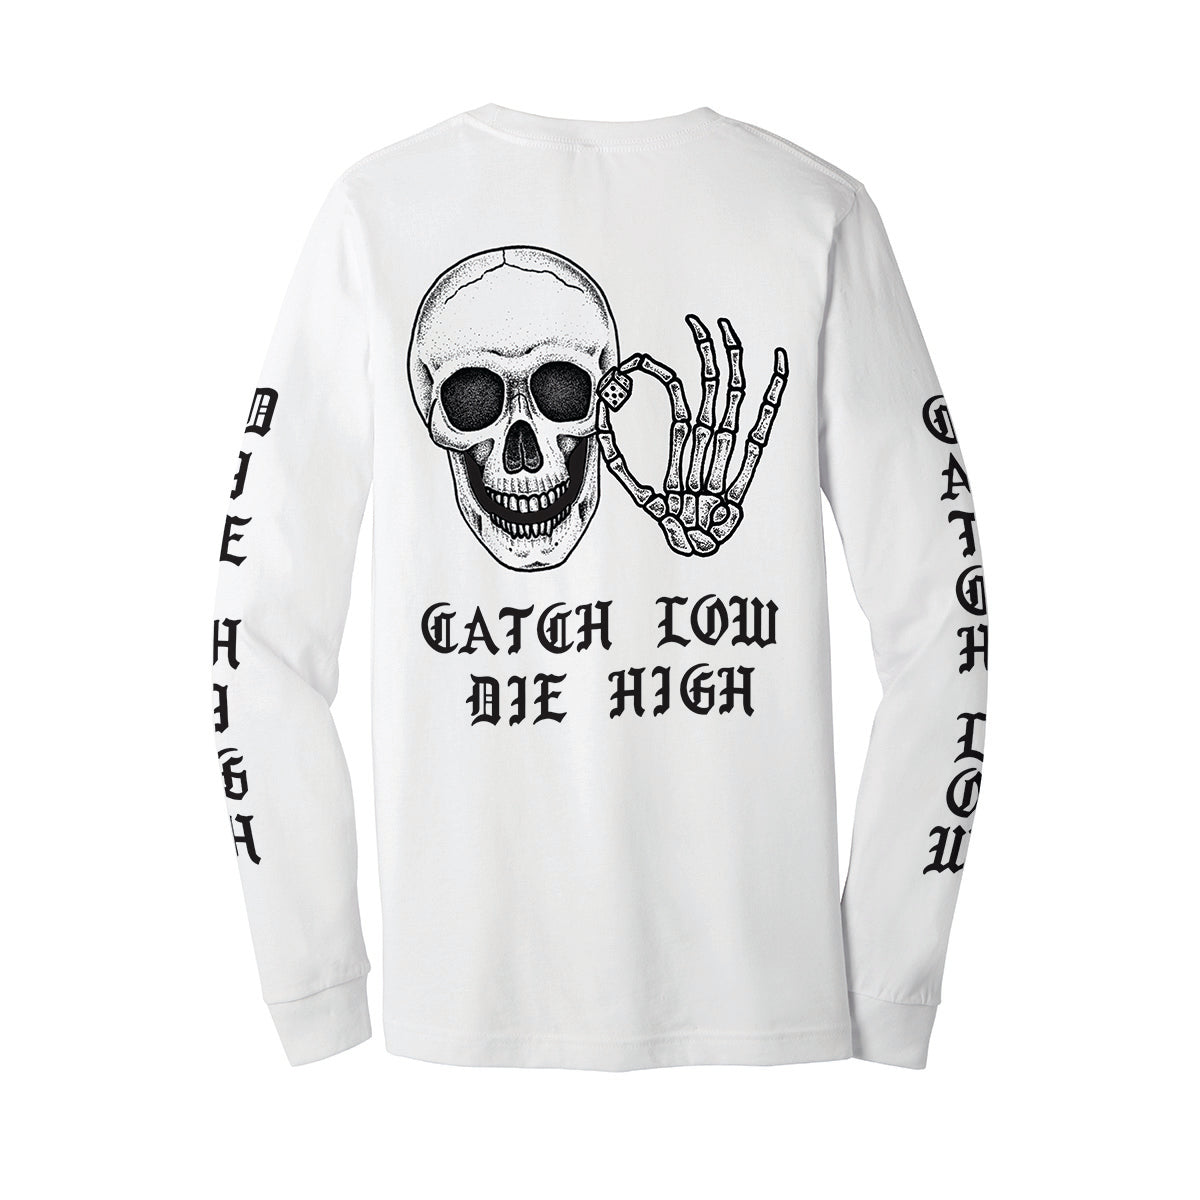 Catch Low Die High [Discontinued]